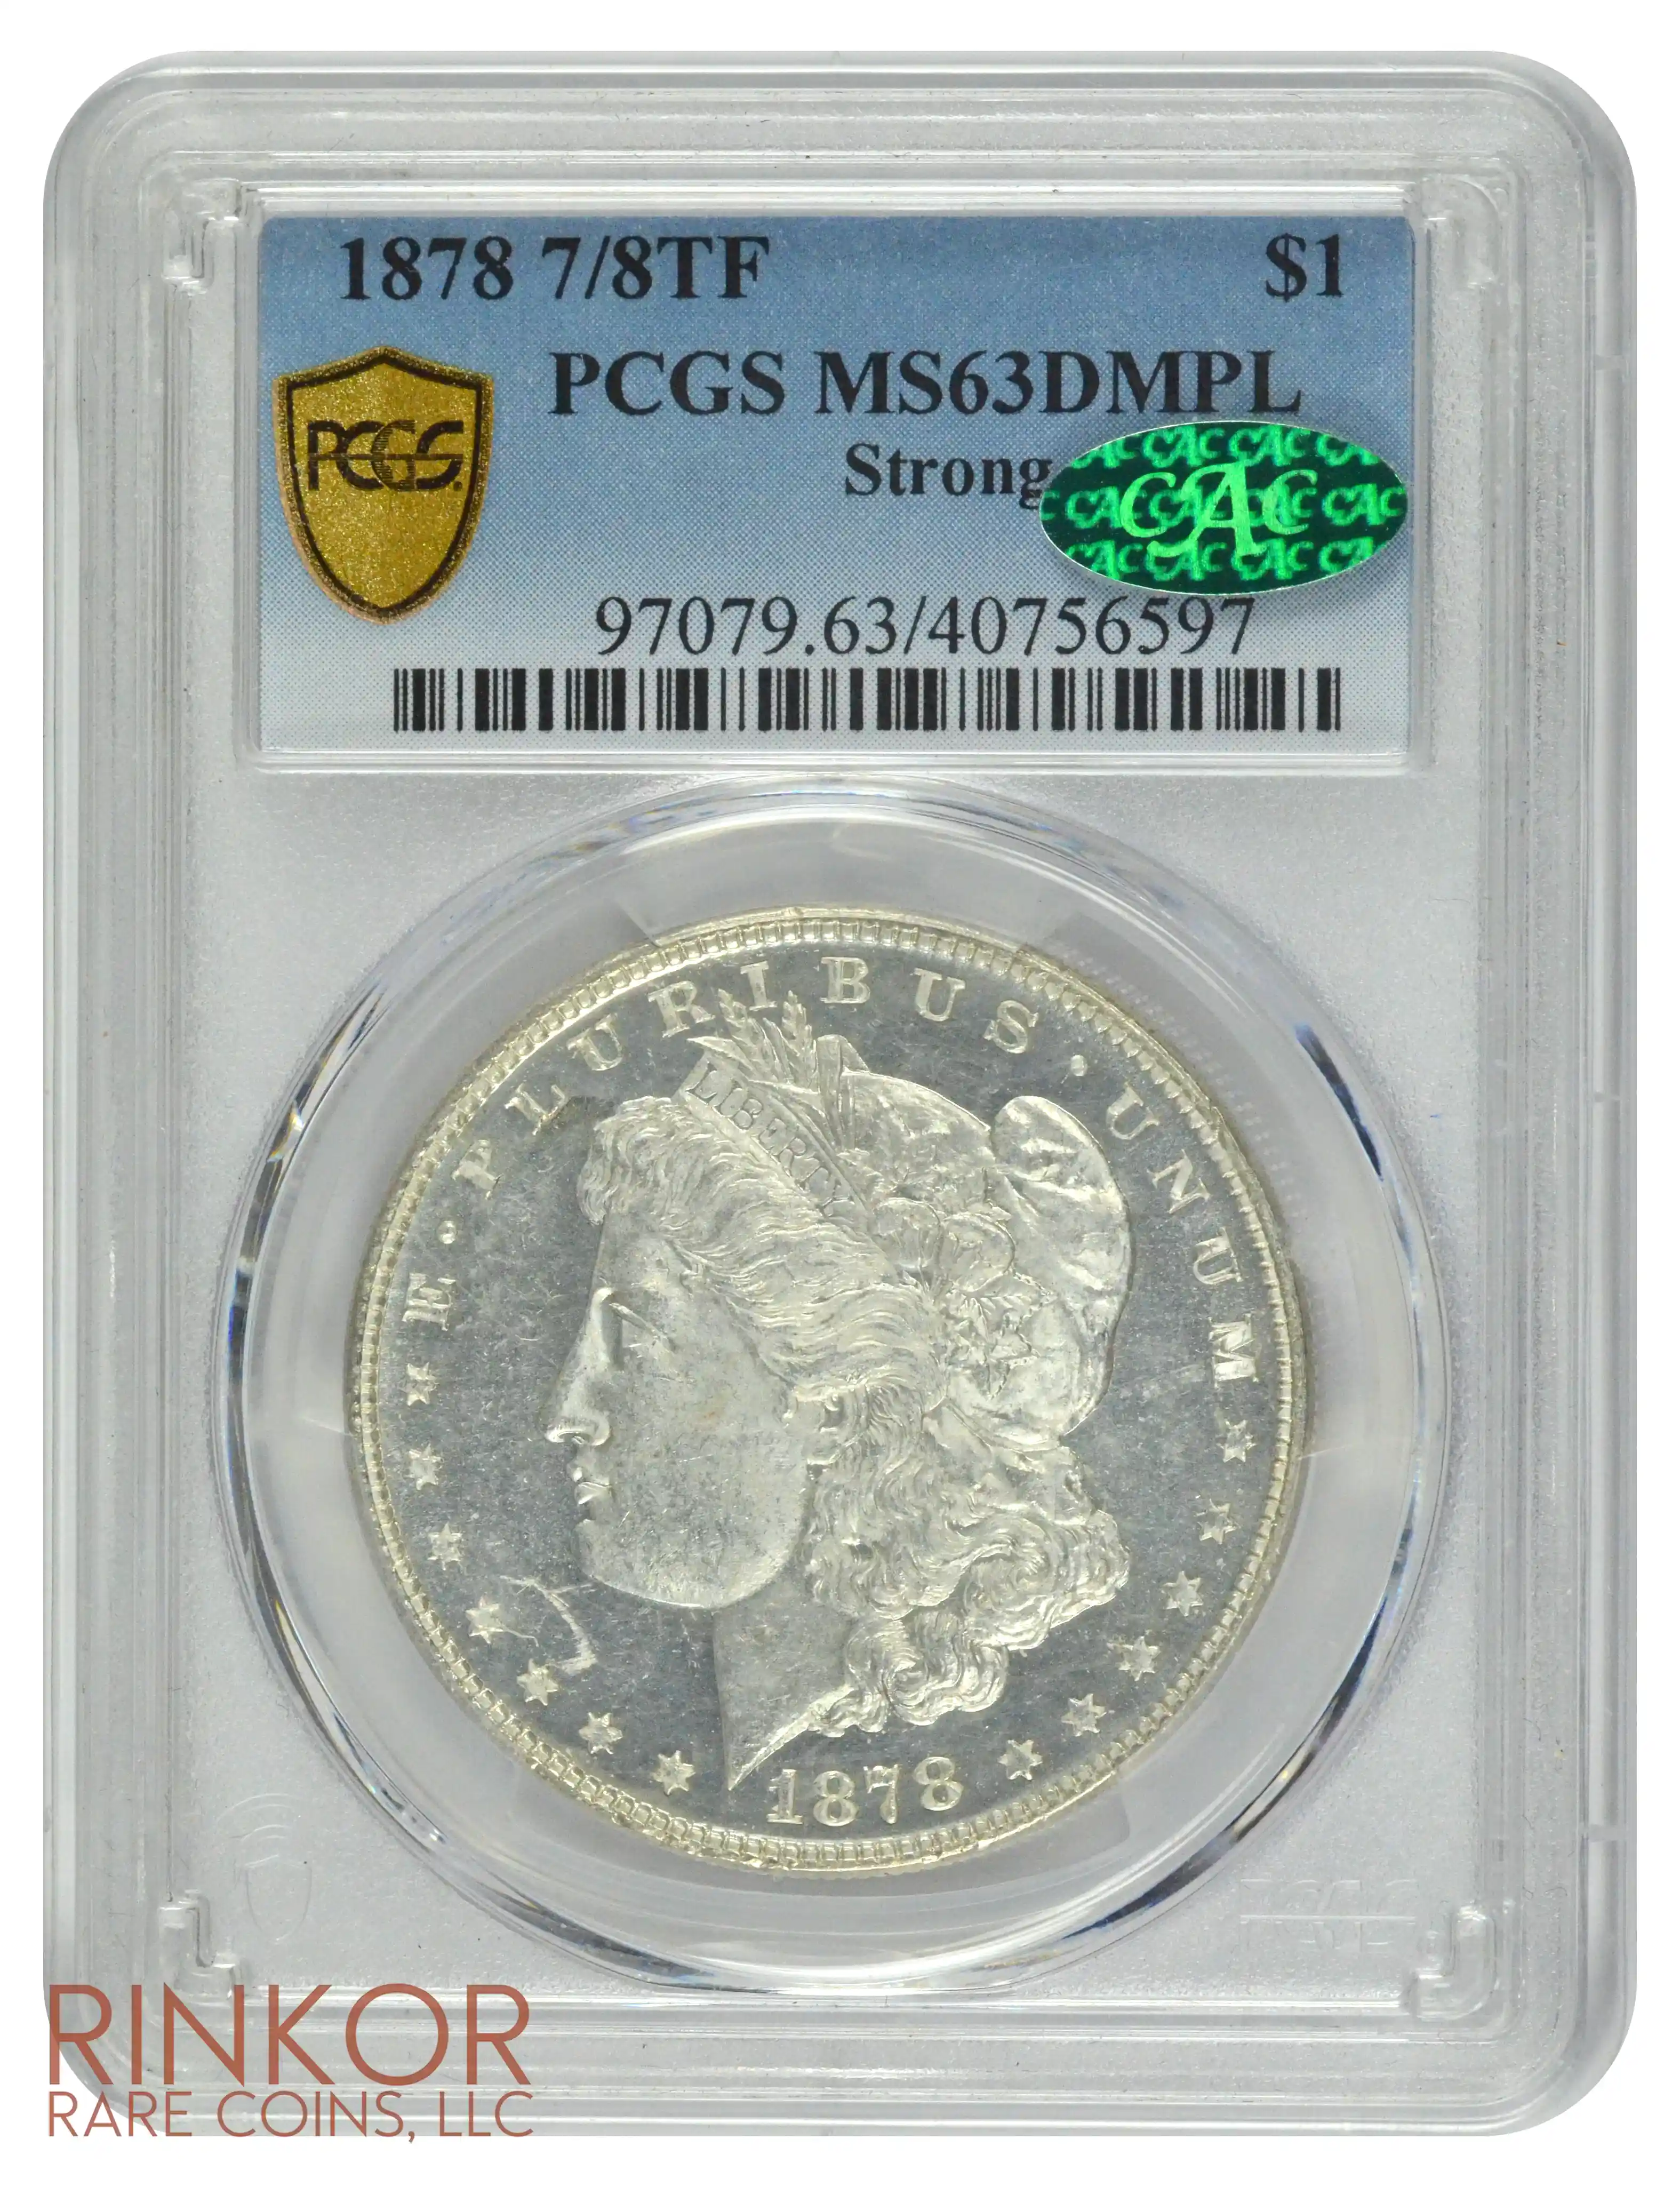 1878 7/8TF Strong $1 PCGS MS 63 DMPL CAC